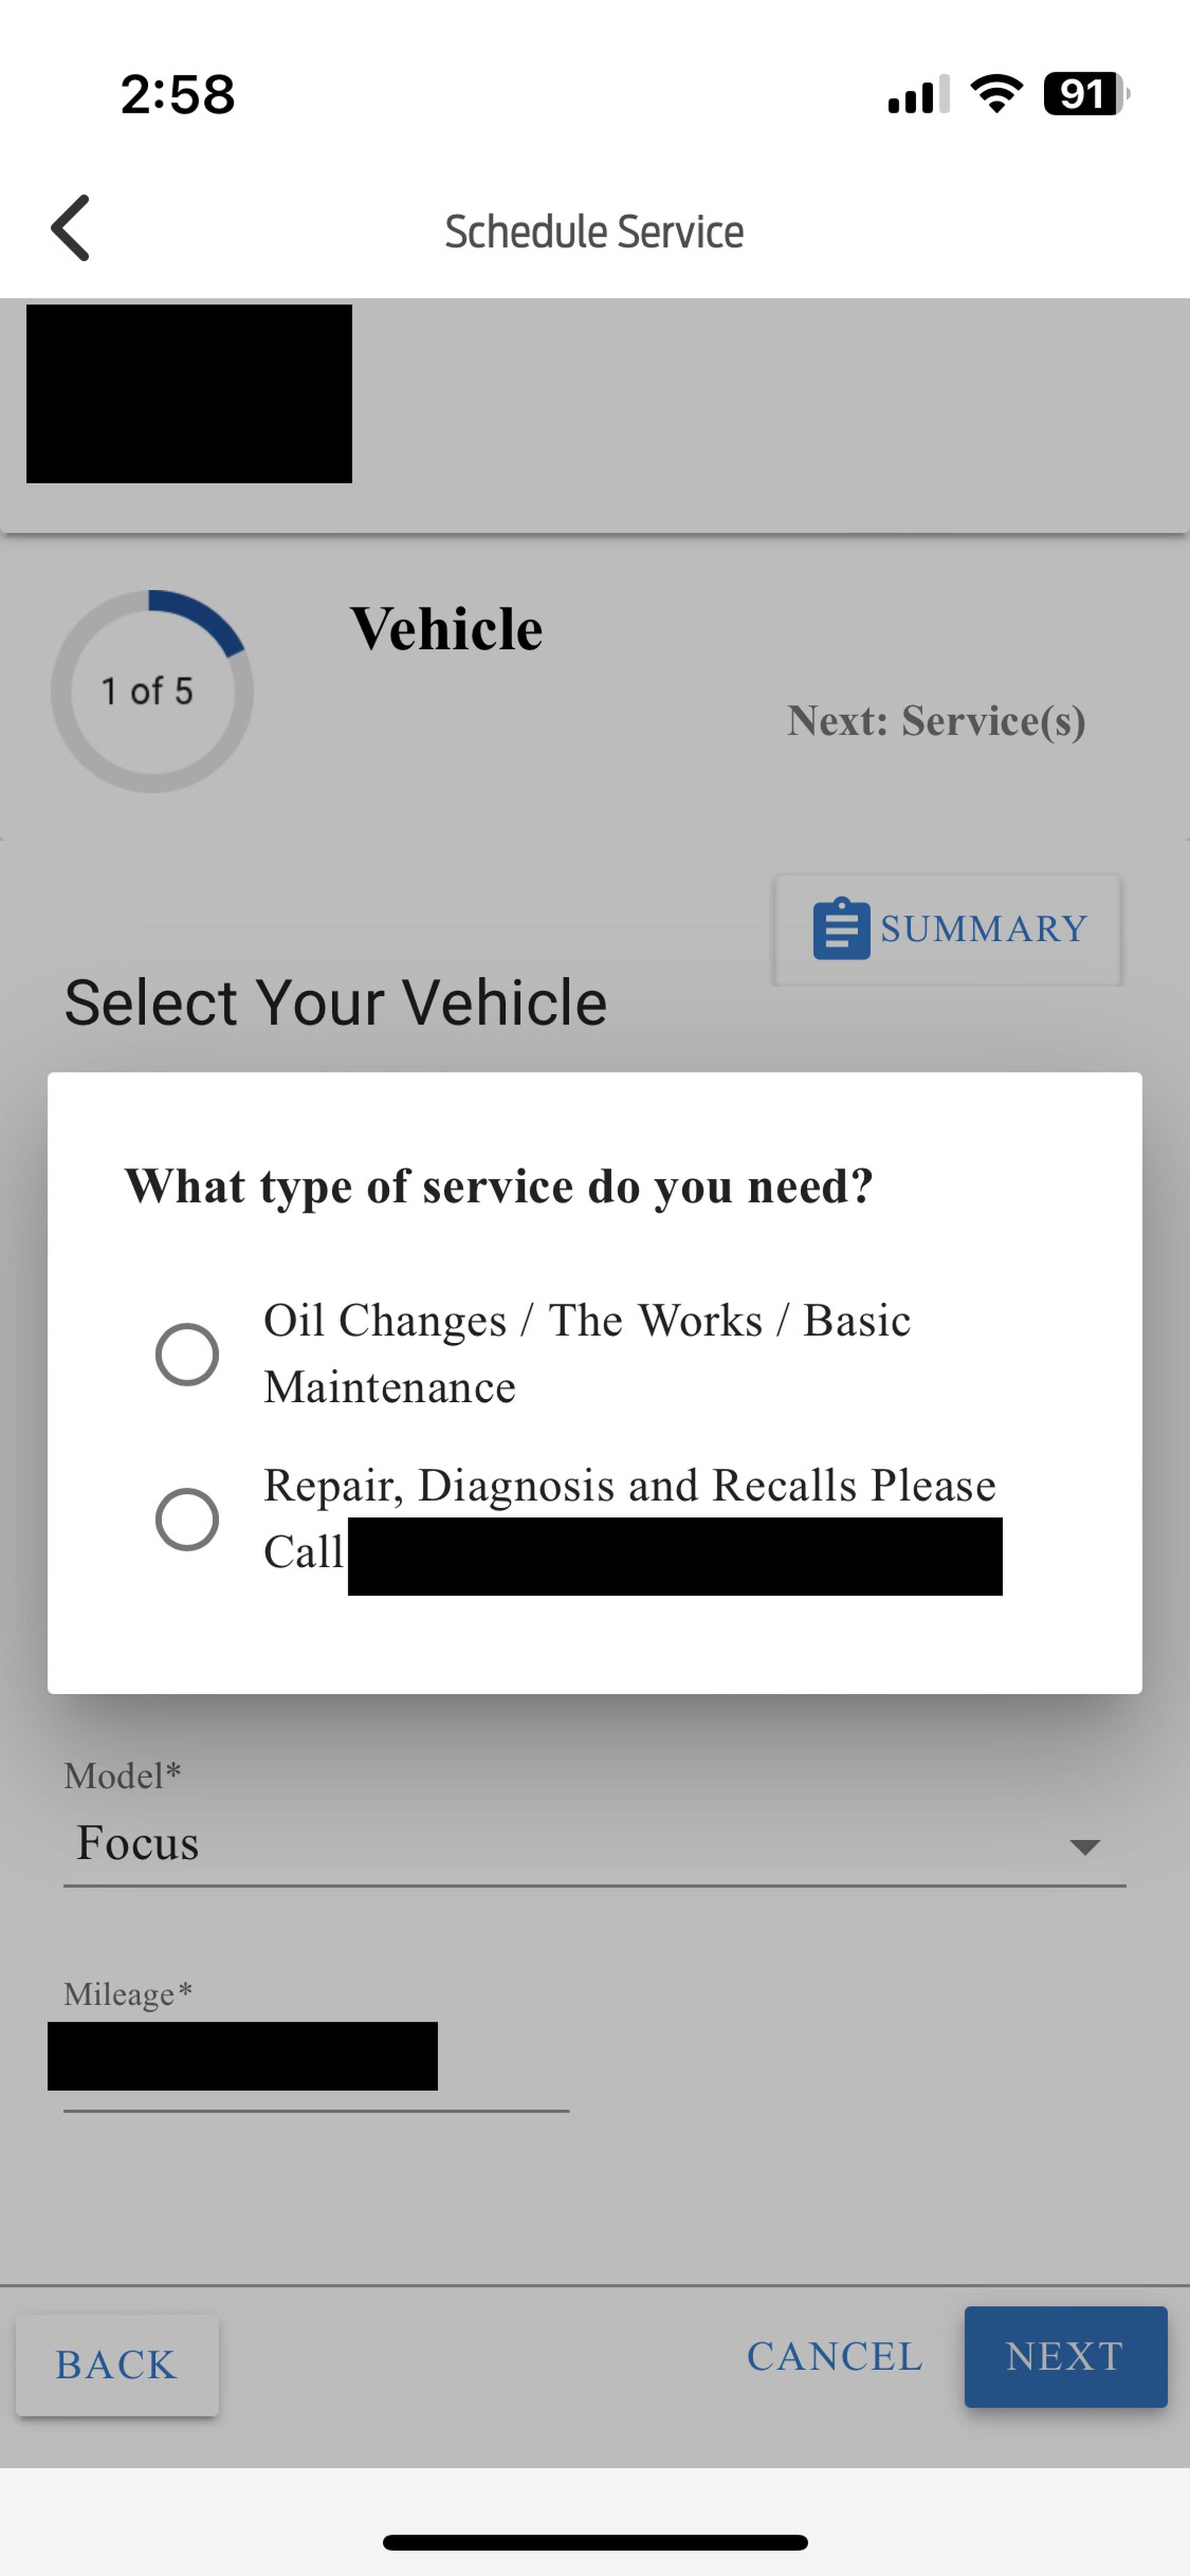 The FordPass app lets you book appointments, but I personally haven't found a dealership that offers mobile service options yet.